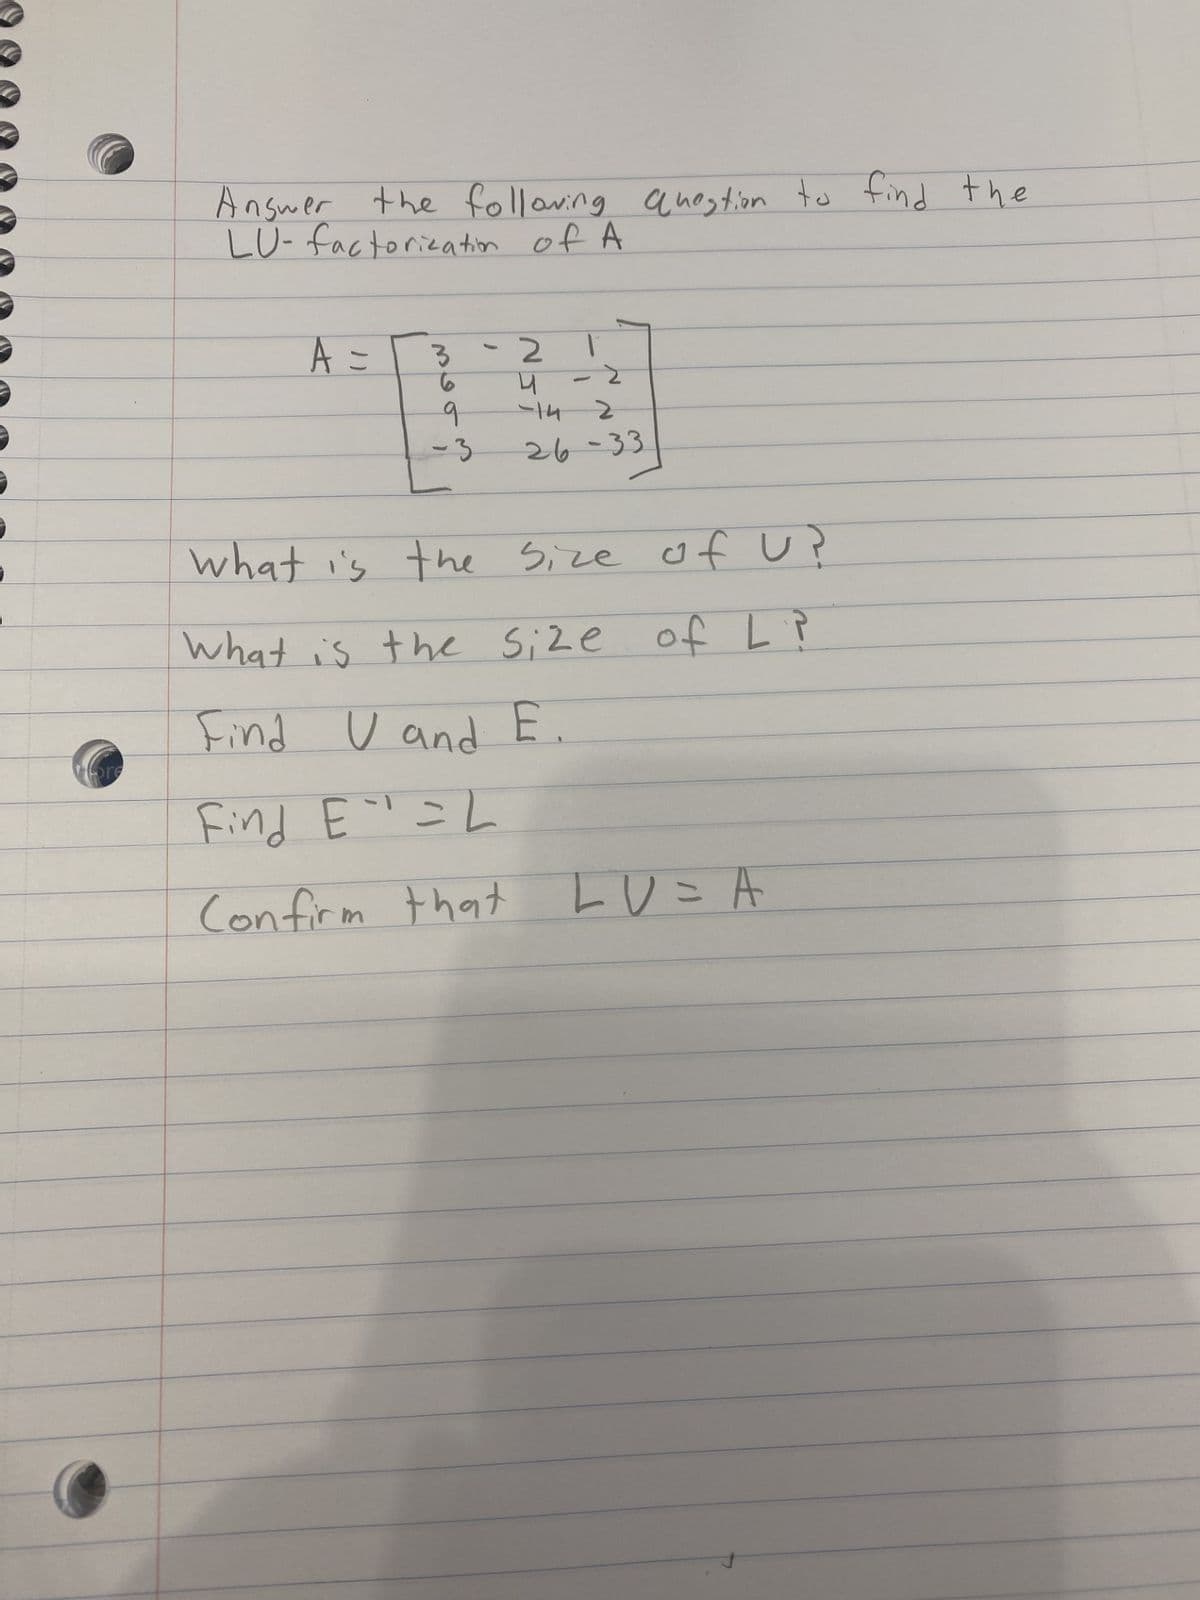 Answer the following question to find the
LU-factorization of A
A =
3-2
4
2
-14 2
26-33
1
9
What is the Size of U?
What is the size of L ?
Find U and E.
Find E=L
Confirm that LU=A